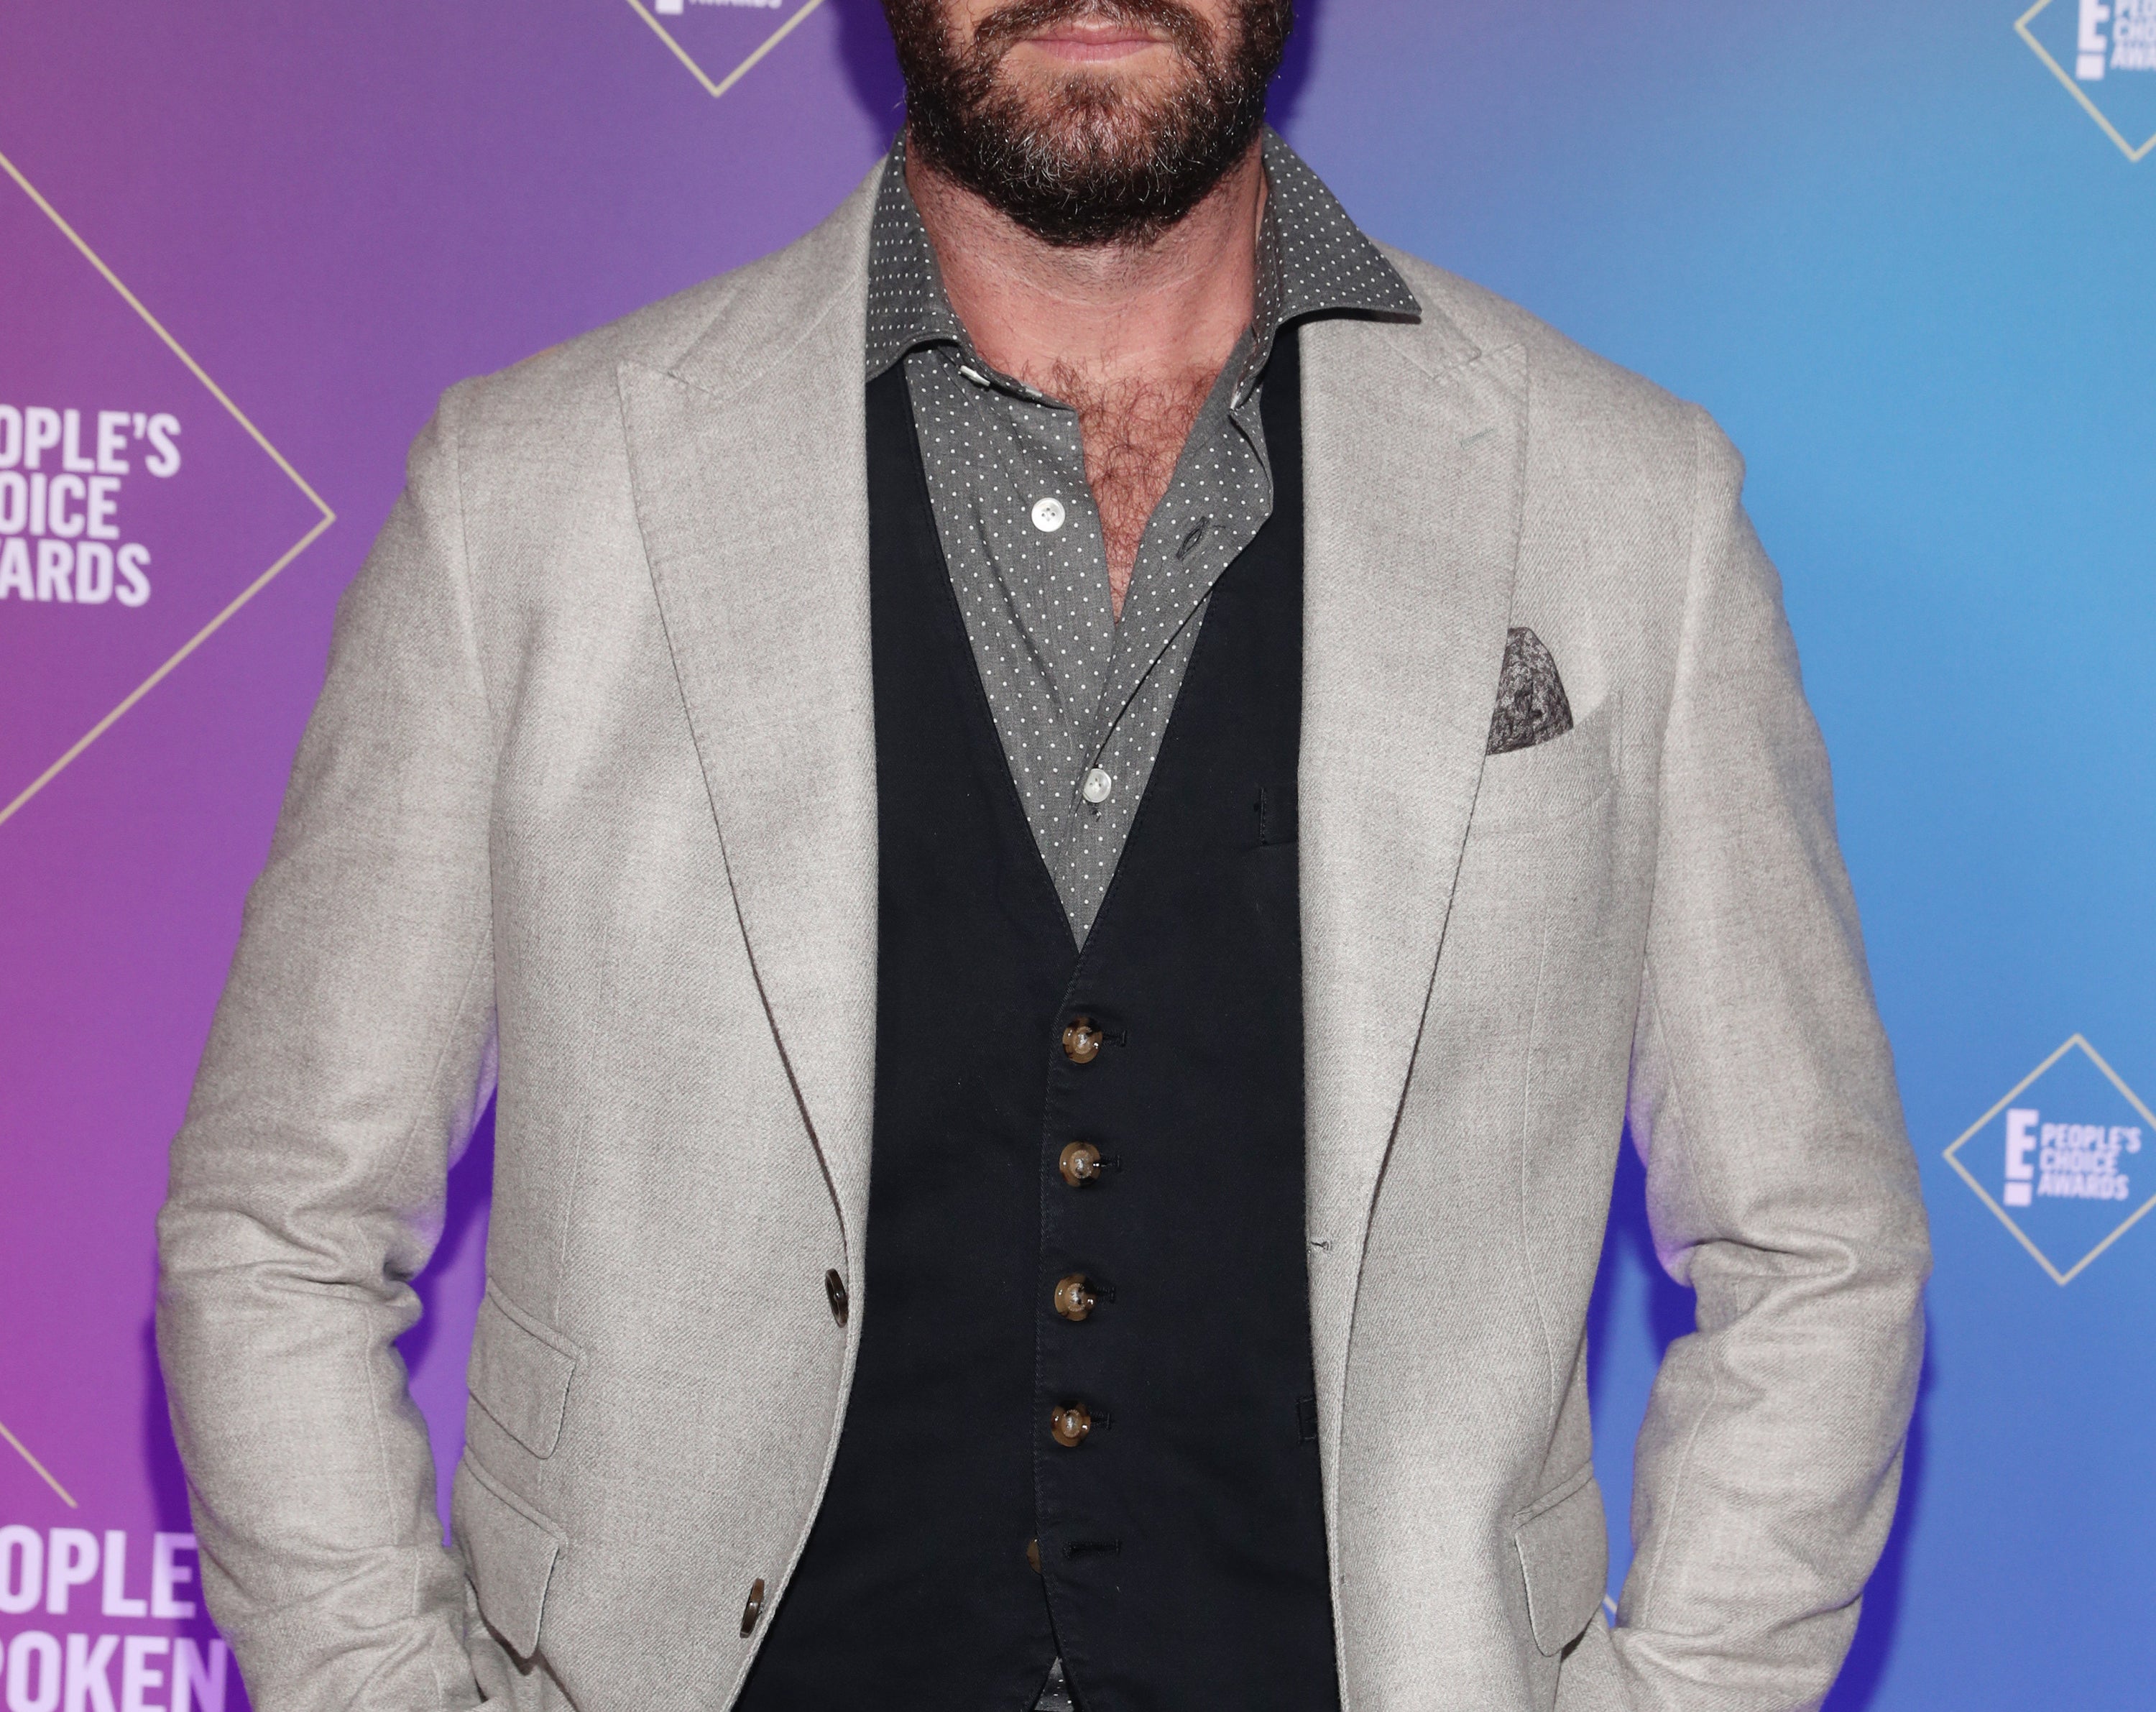 Armie attends an event